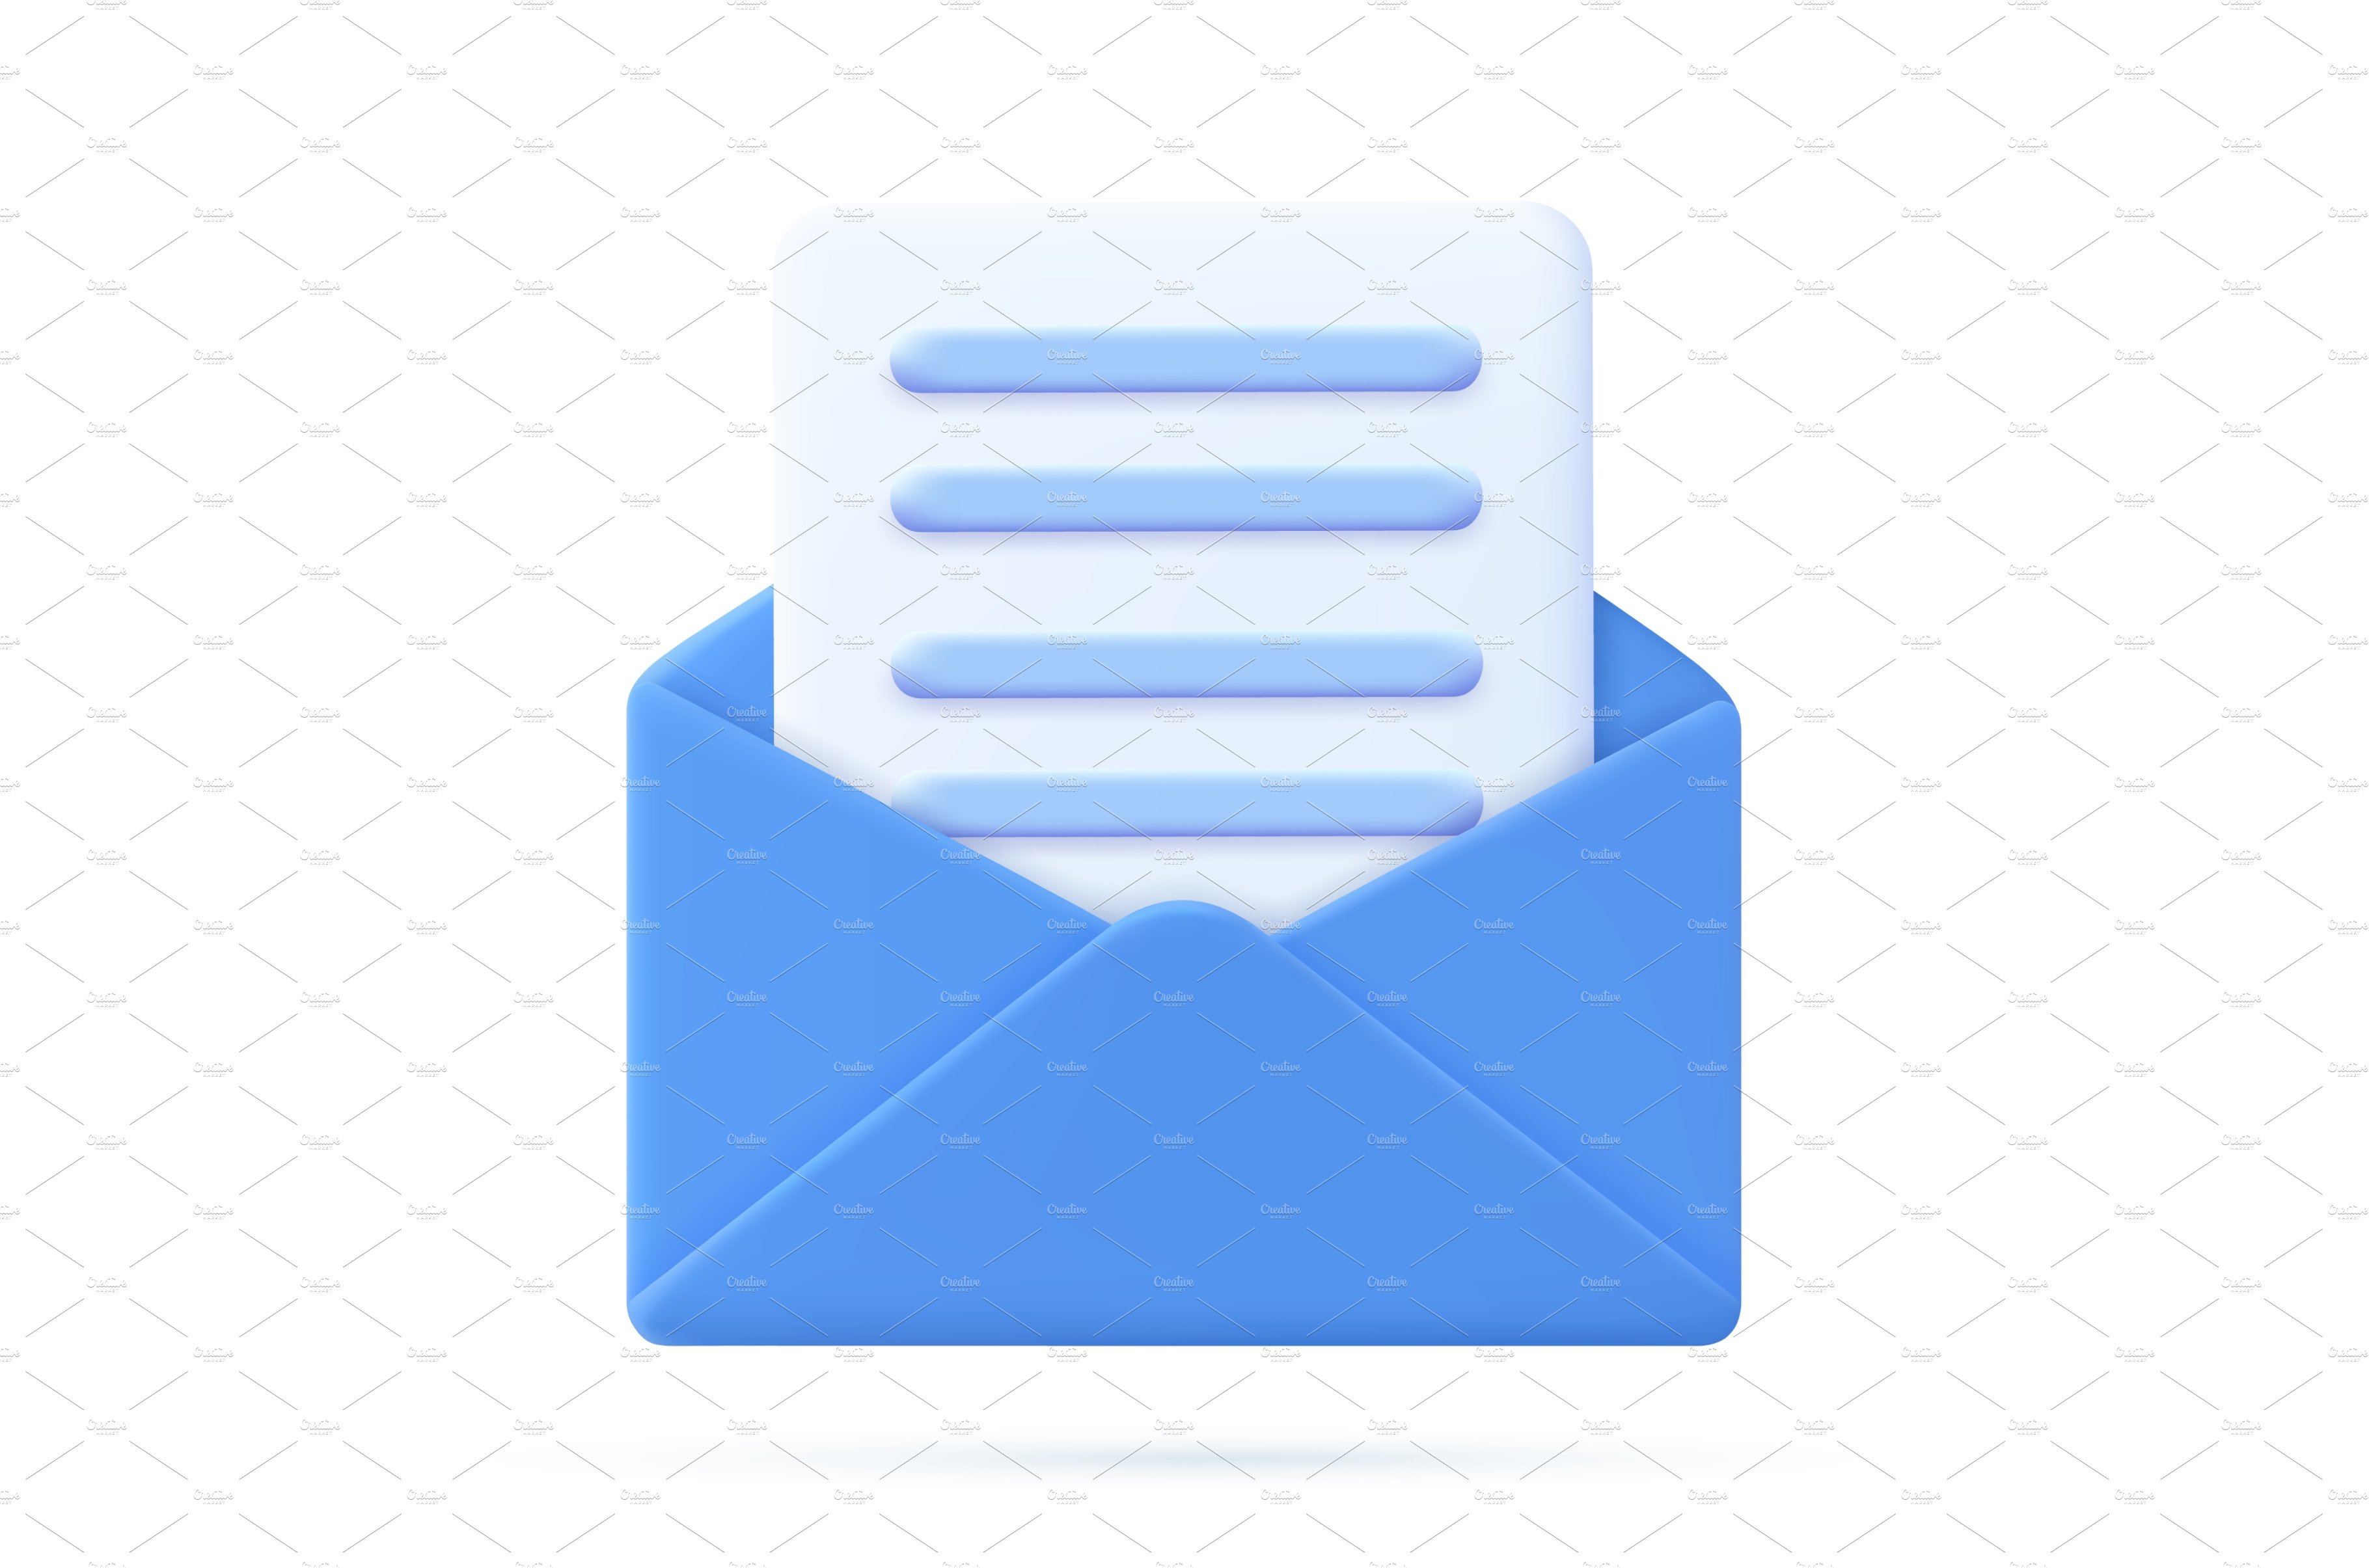 Envelope with paper documents icon. cover image.